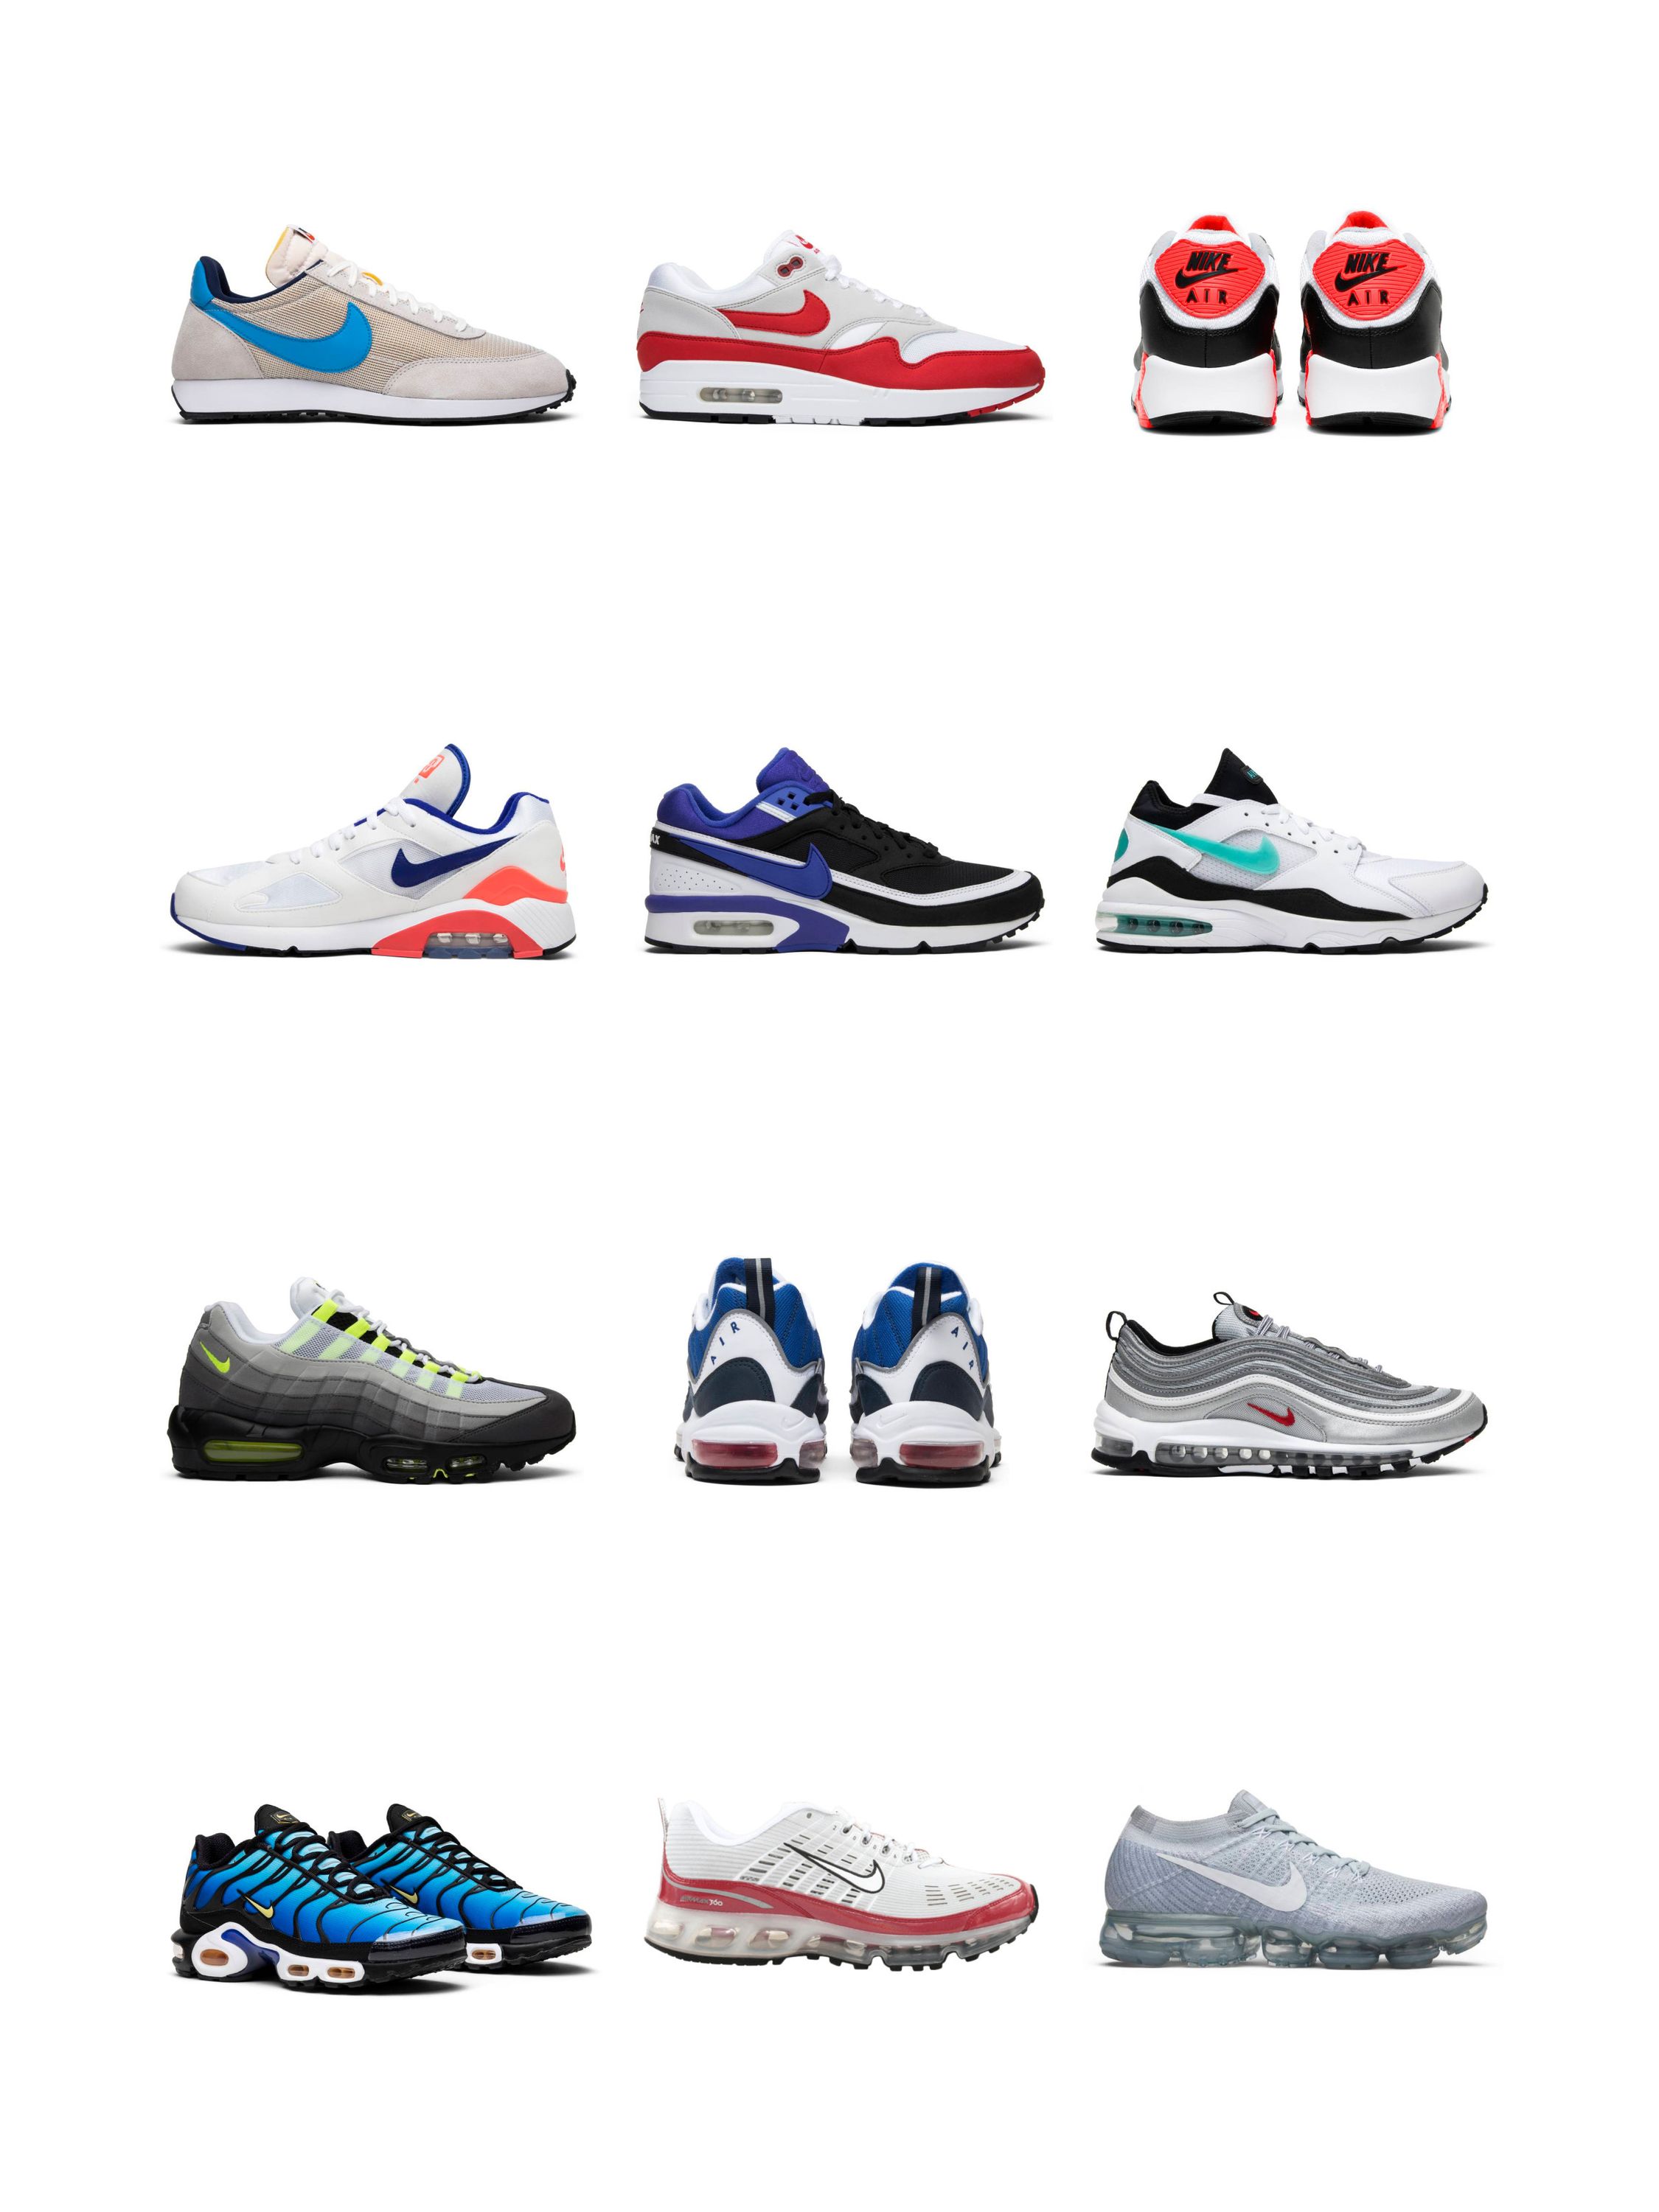 Running On Air: A History Of Nike Air Max | Goat